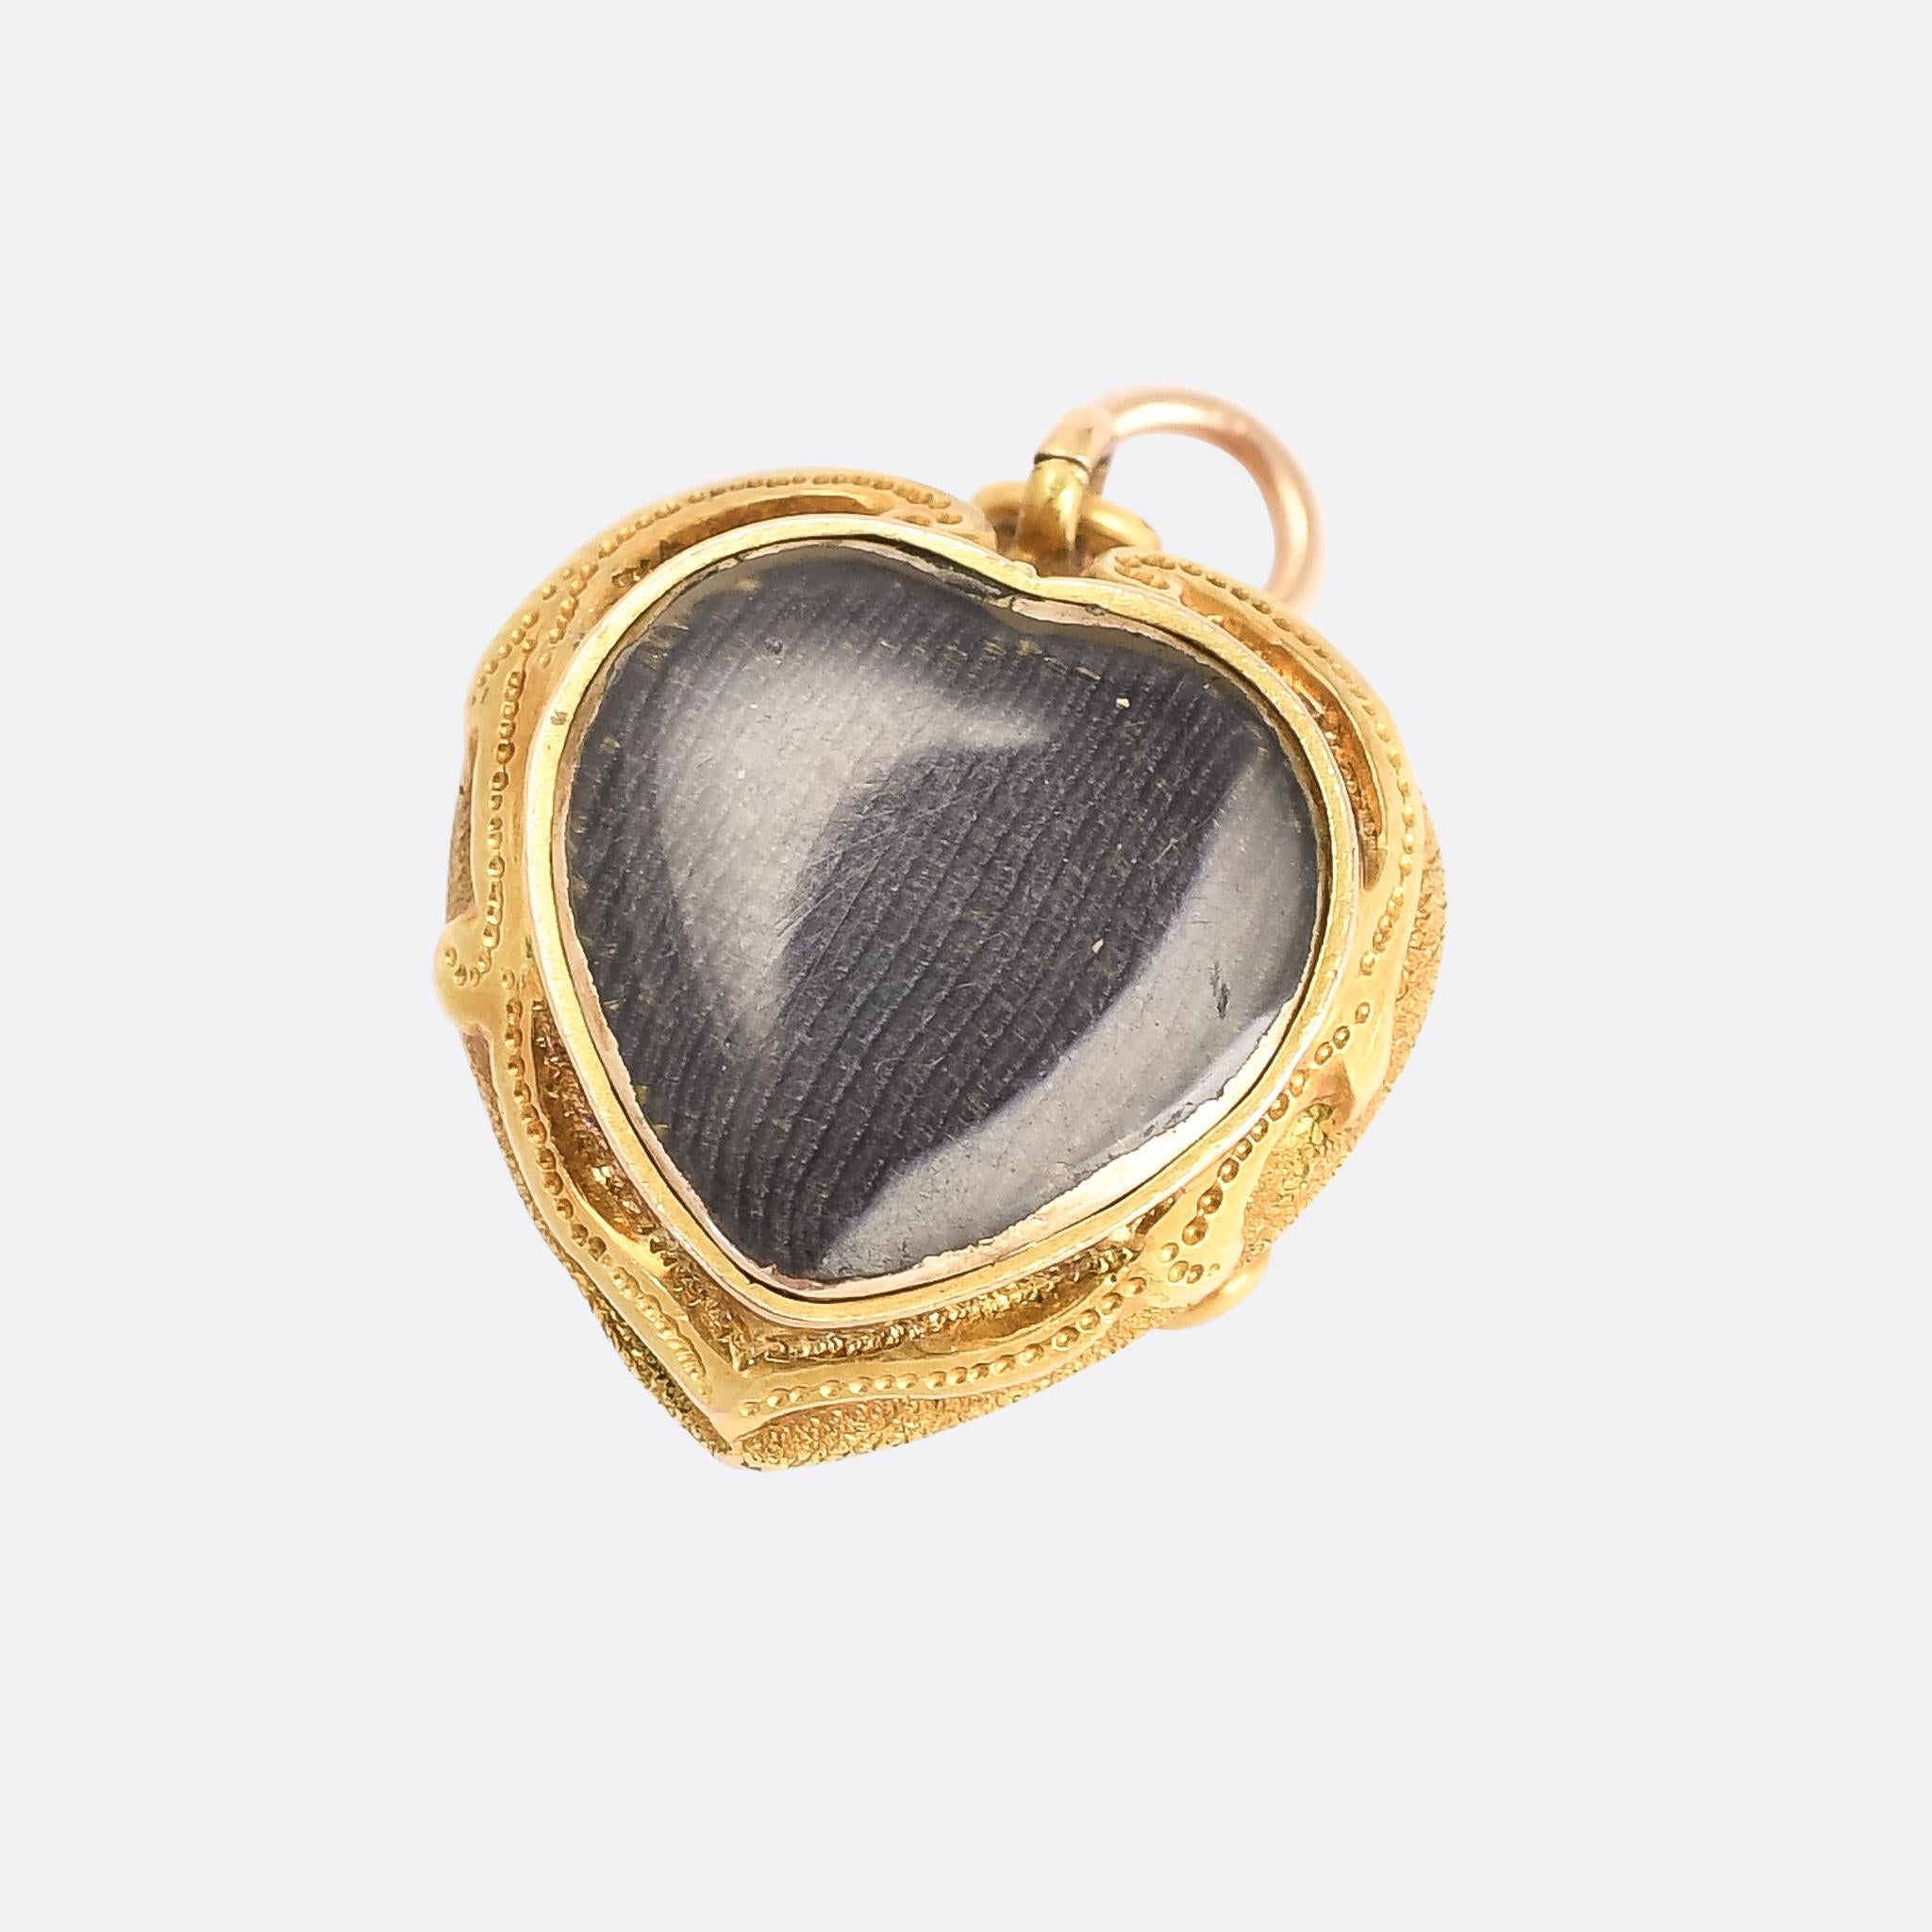 A beautiful mid-Victorian heart locket set with three egg-shaped turquoise cabochons. The back features a heart-shaped glass locket compartment, and the stones on the front are surrounded by rococo-inspired foliate goldwork on a finely textured